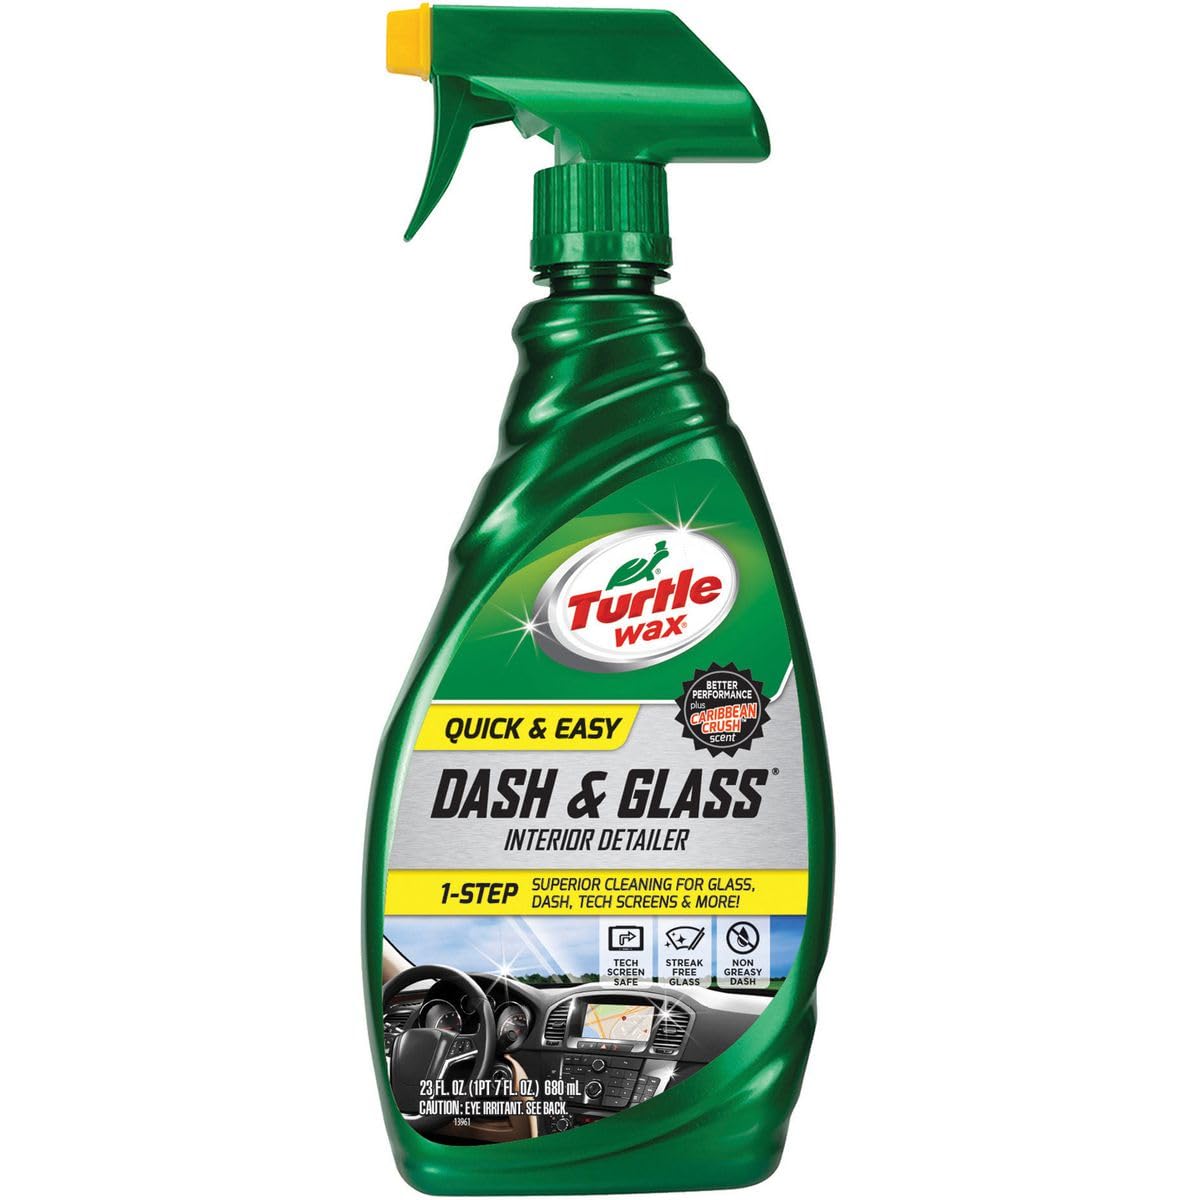 Turtle Wax T-930 Dash and Glass Protectant with Foaming Trigger - 23 fl. oz. by Turtle Wax von Turtle Wax